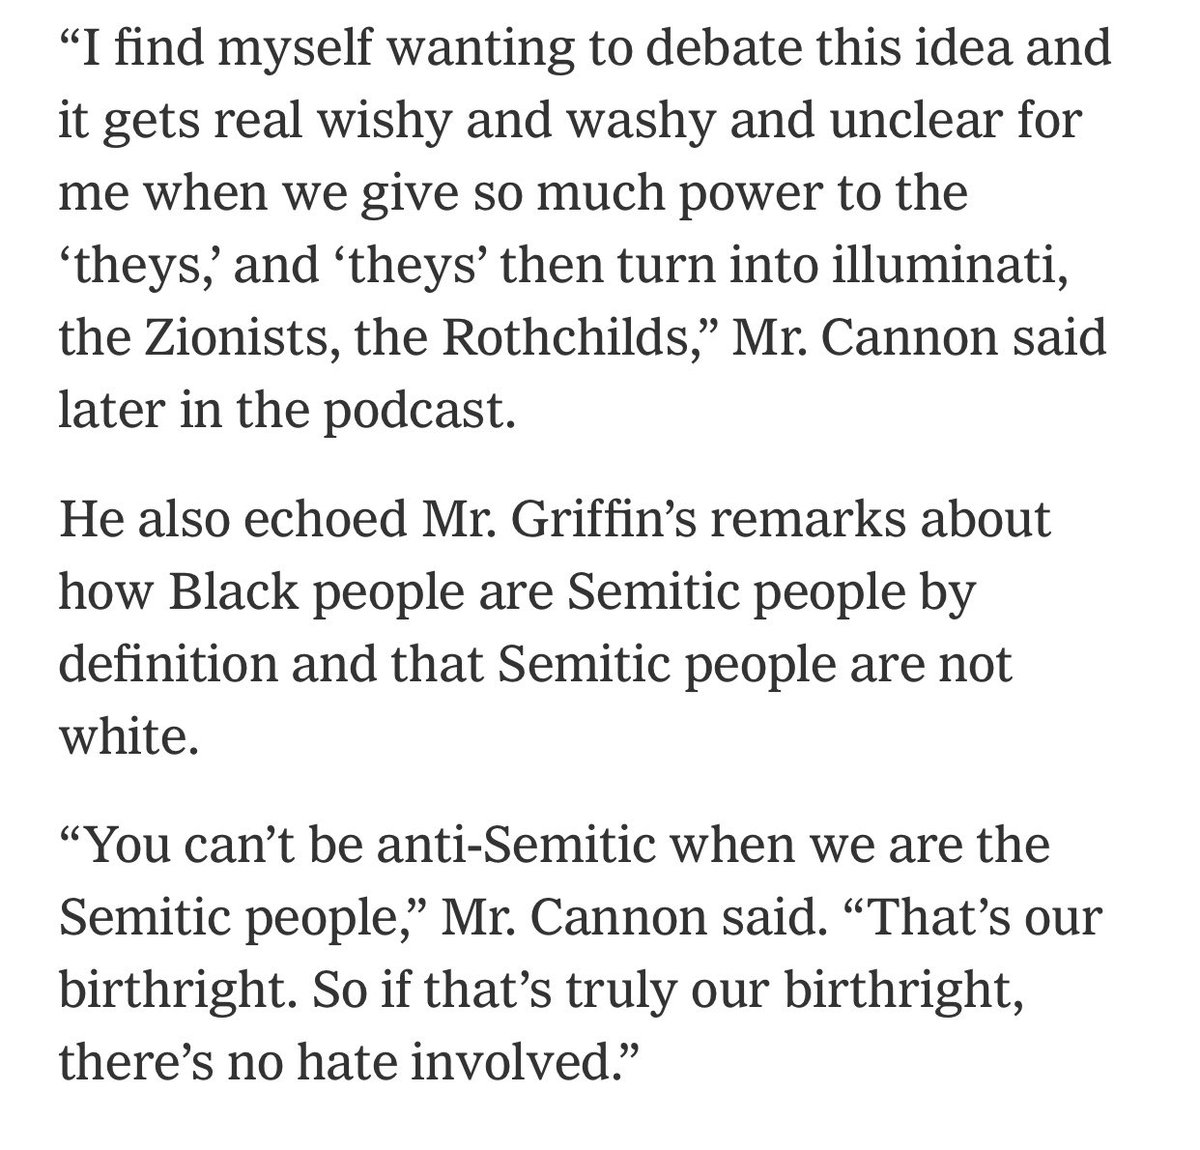 If you read what Nick Cannon said it’s indefensible.Aside from calling White people a “little less” (inferior) and calling White and Jewish people “savages,” he said all this nonsense.I’m not down with this. We can’t accept this kind of bigotry. https://www.nytimes.com/2020/07/15/arts/television/nick-cannon-fired.amp.html